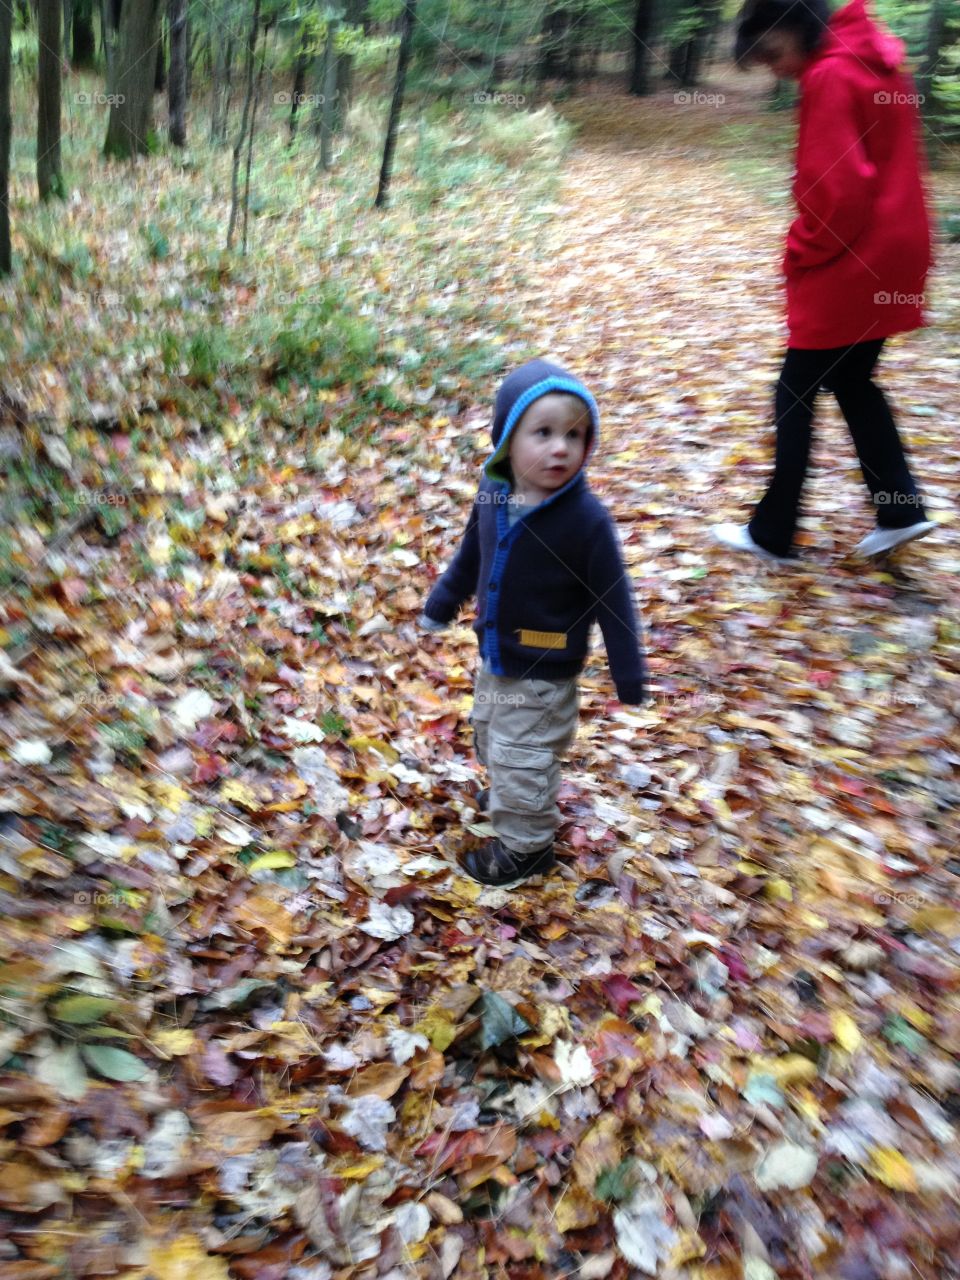 "Little Man" playing in leaves. Hiking in the Catskills with "little man" on an Autumn Da
